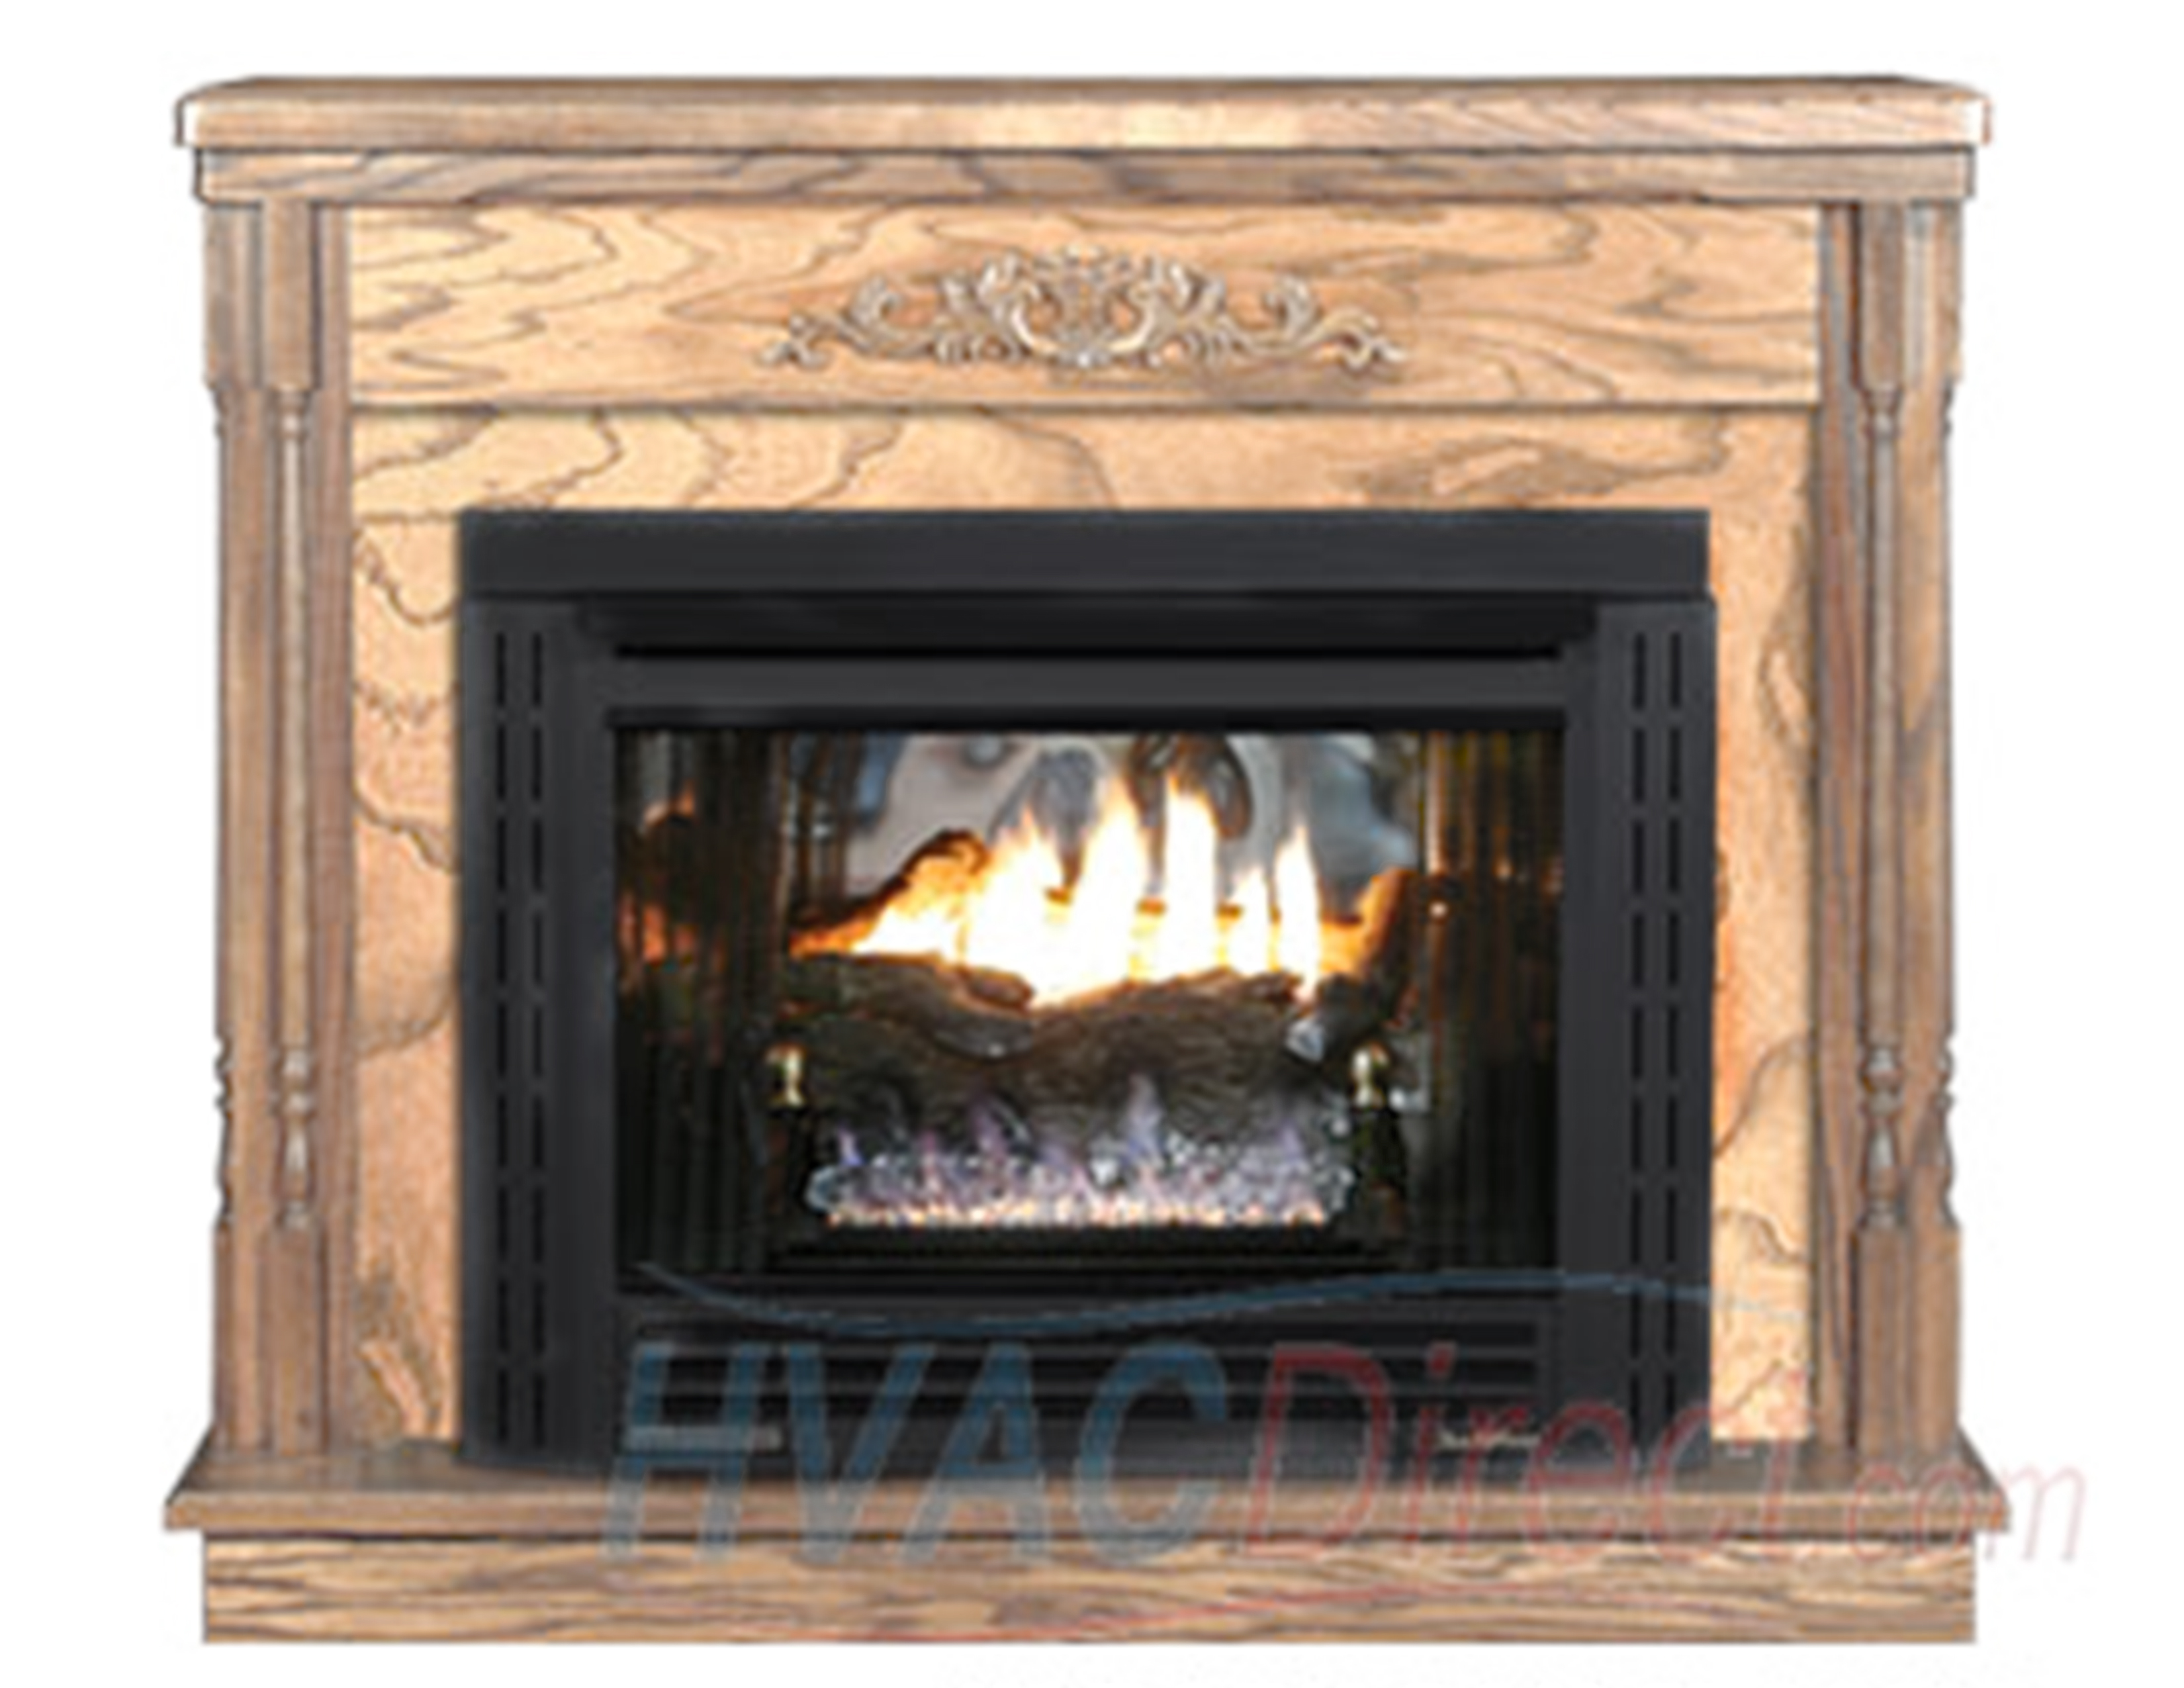 Portable Gas Fireplace Indoor New Buck Stove Model 34zc Vent Free Gas Fireplace